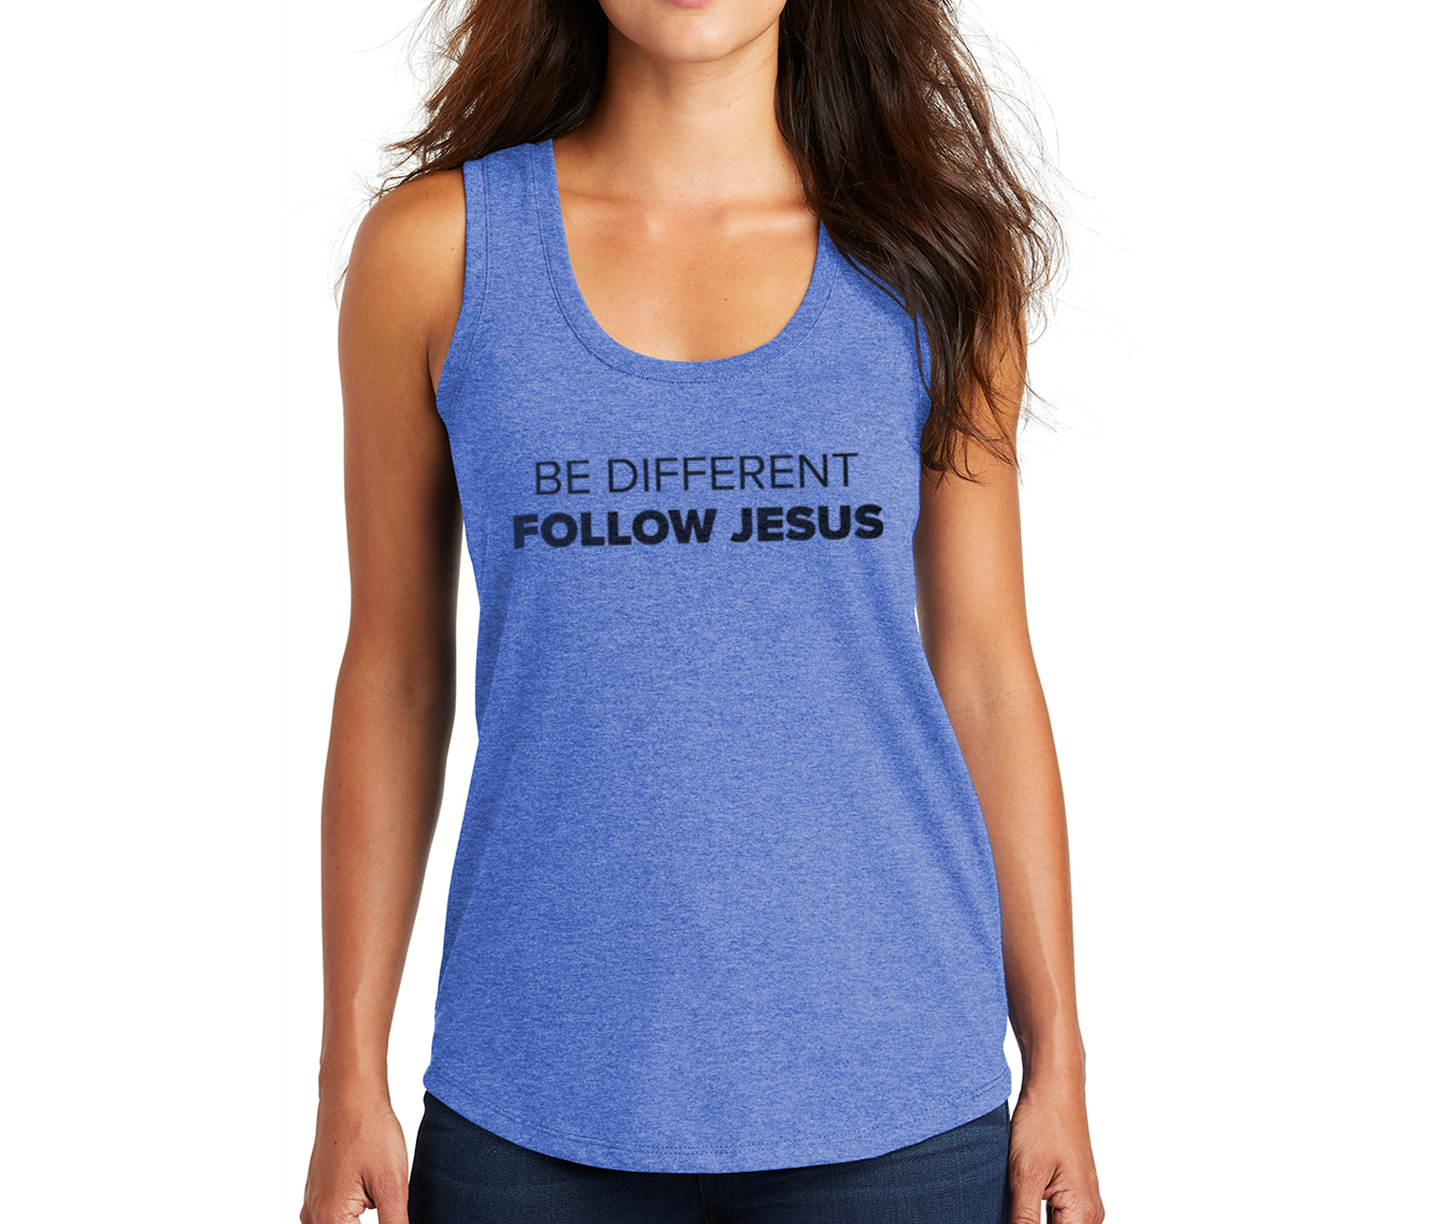 BE DIFFERENT FOLLOW JESUS TANK BLUE FRONT - CHRISTIAN CLOTHING